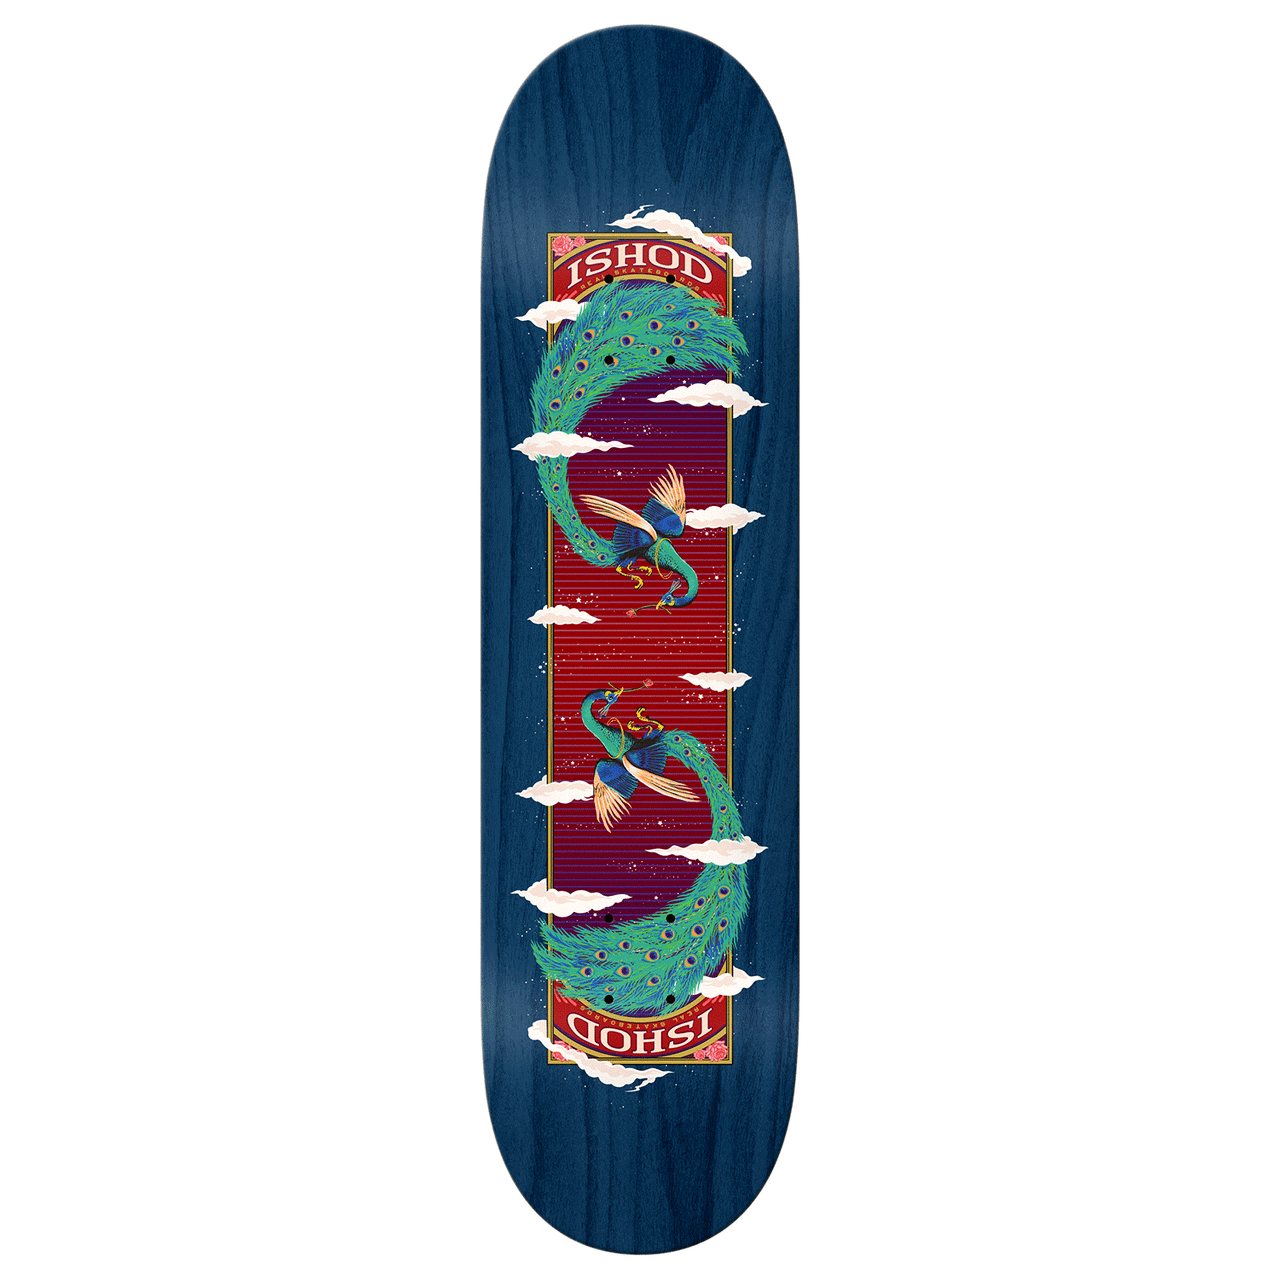 REAL DECK ISHOD FEATHERS TWIN TAIL SLICK (8.3")